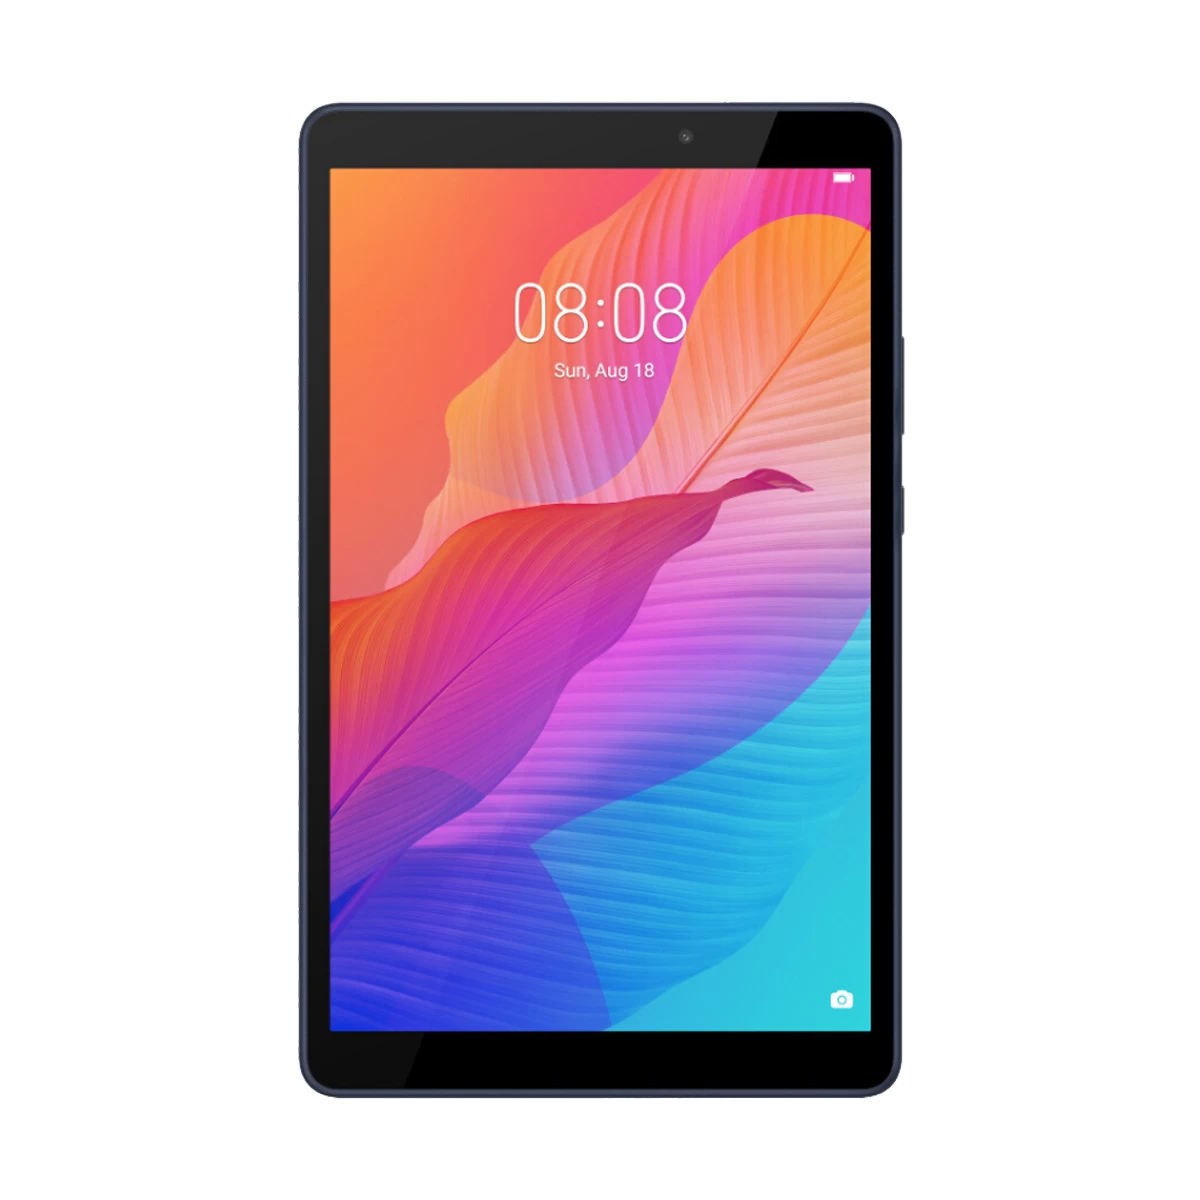 Huawei Matepad T8 (Wi-Fi) 2GB RAM 8 Inch Deepsea Blue Tablet #KOB2-L09 (Google Playstore Not supported)